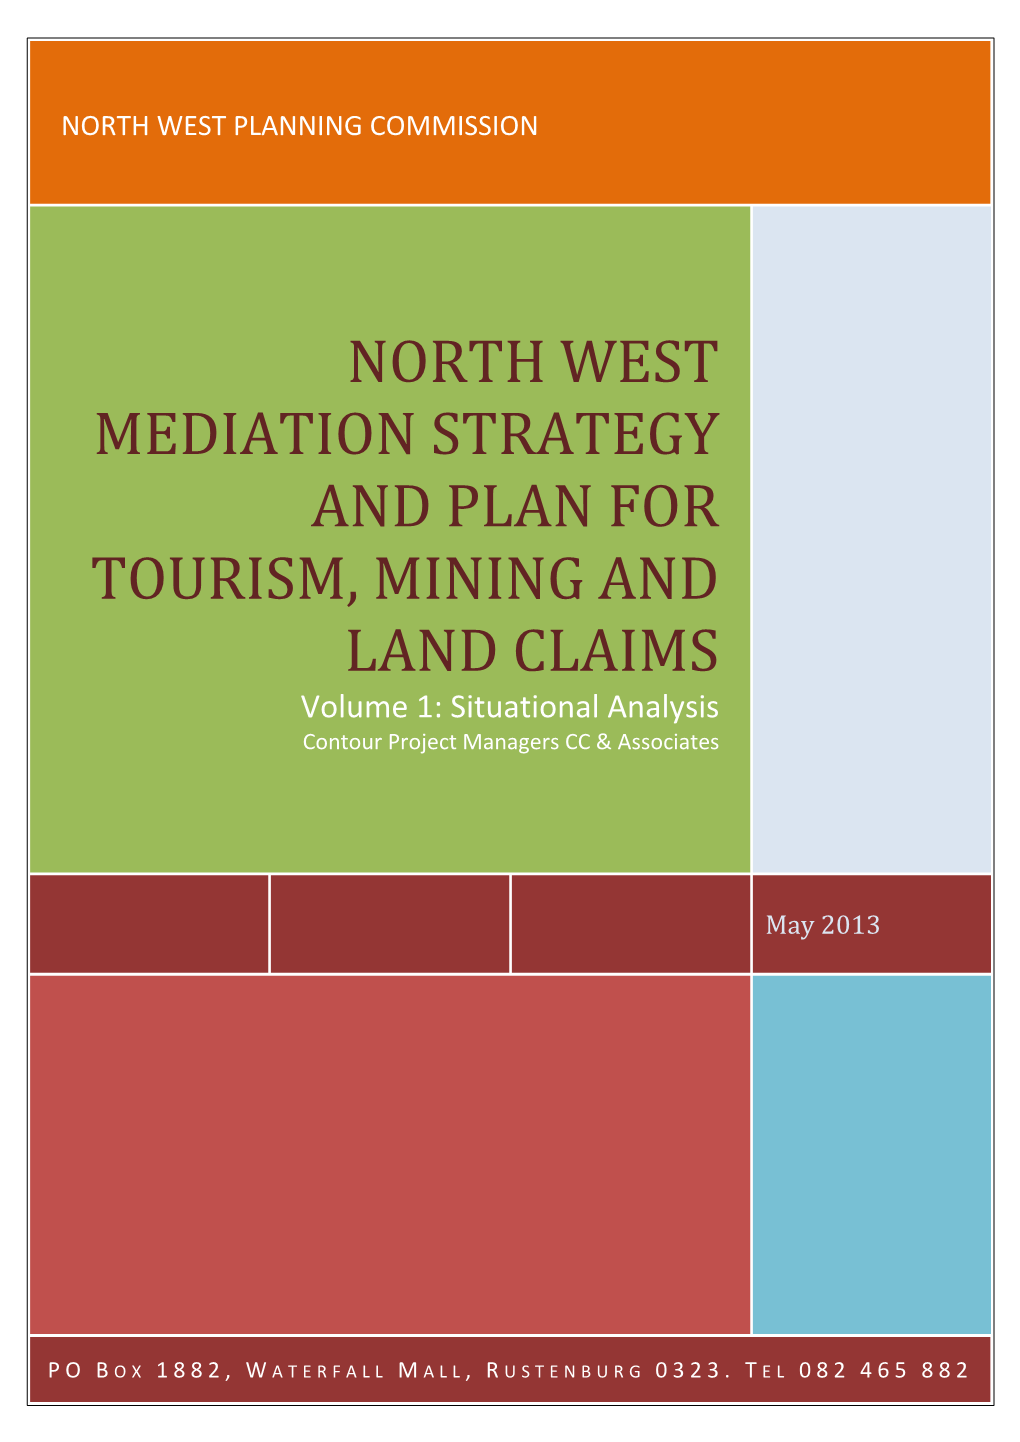 North West Mediation Strategy and Plan for Tourism, Mining and Land Claims